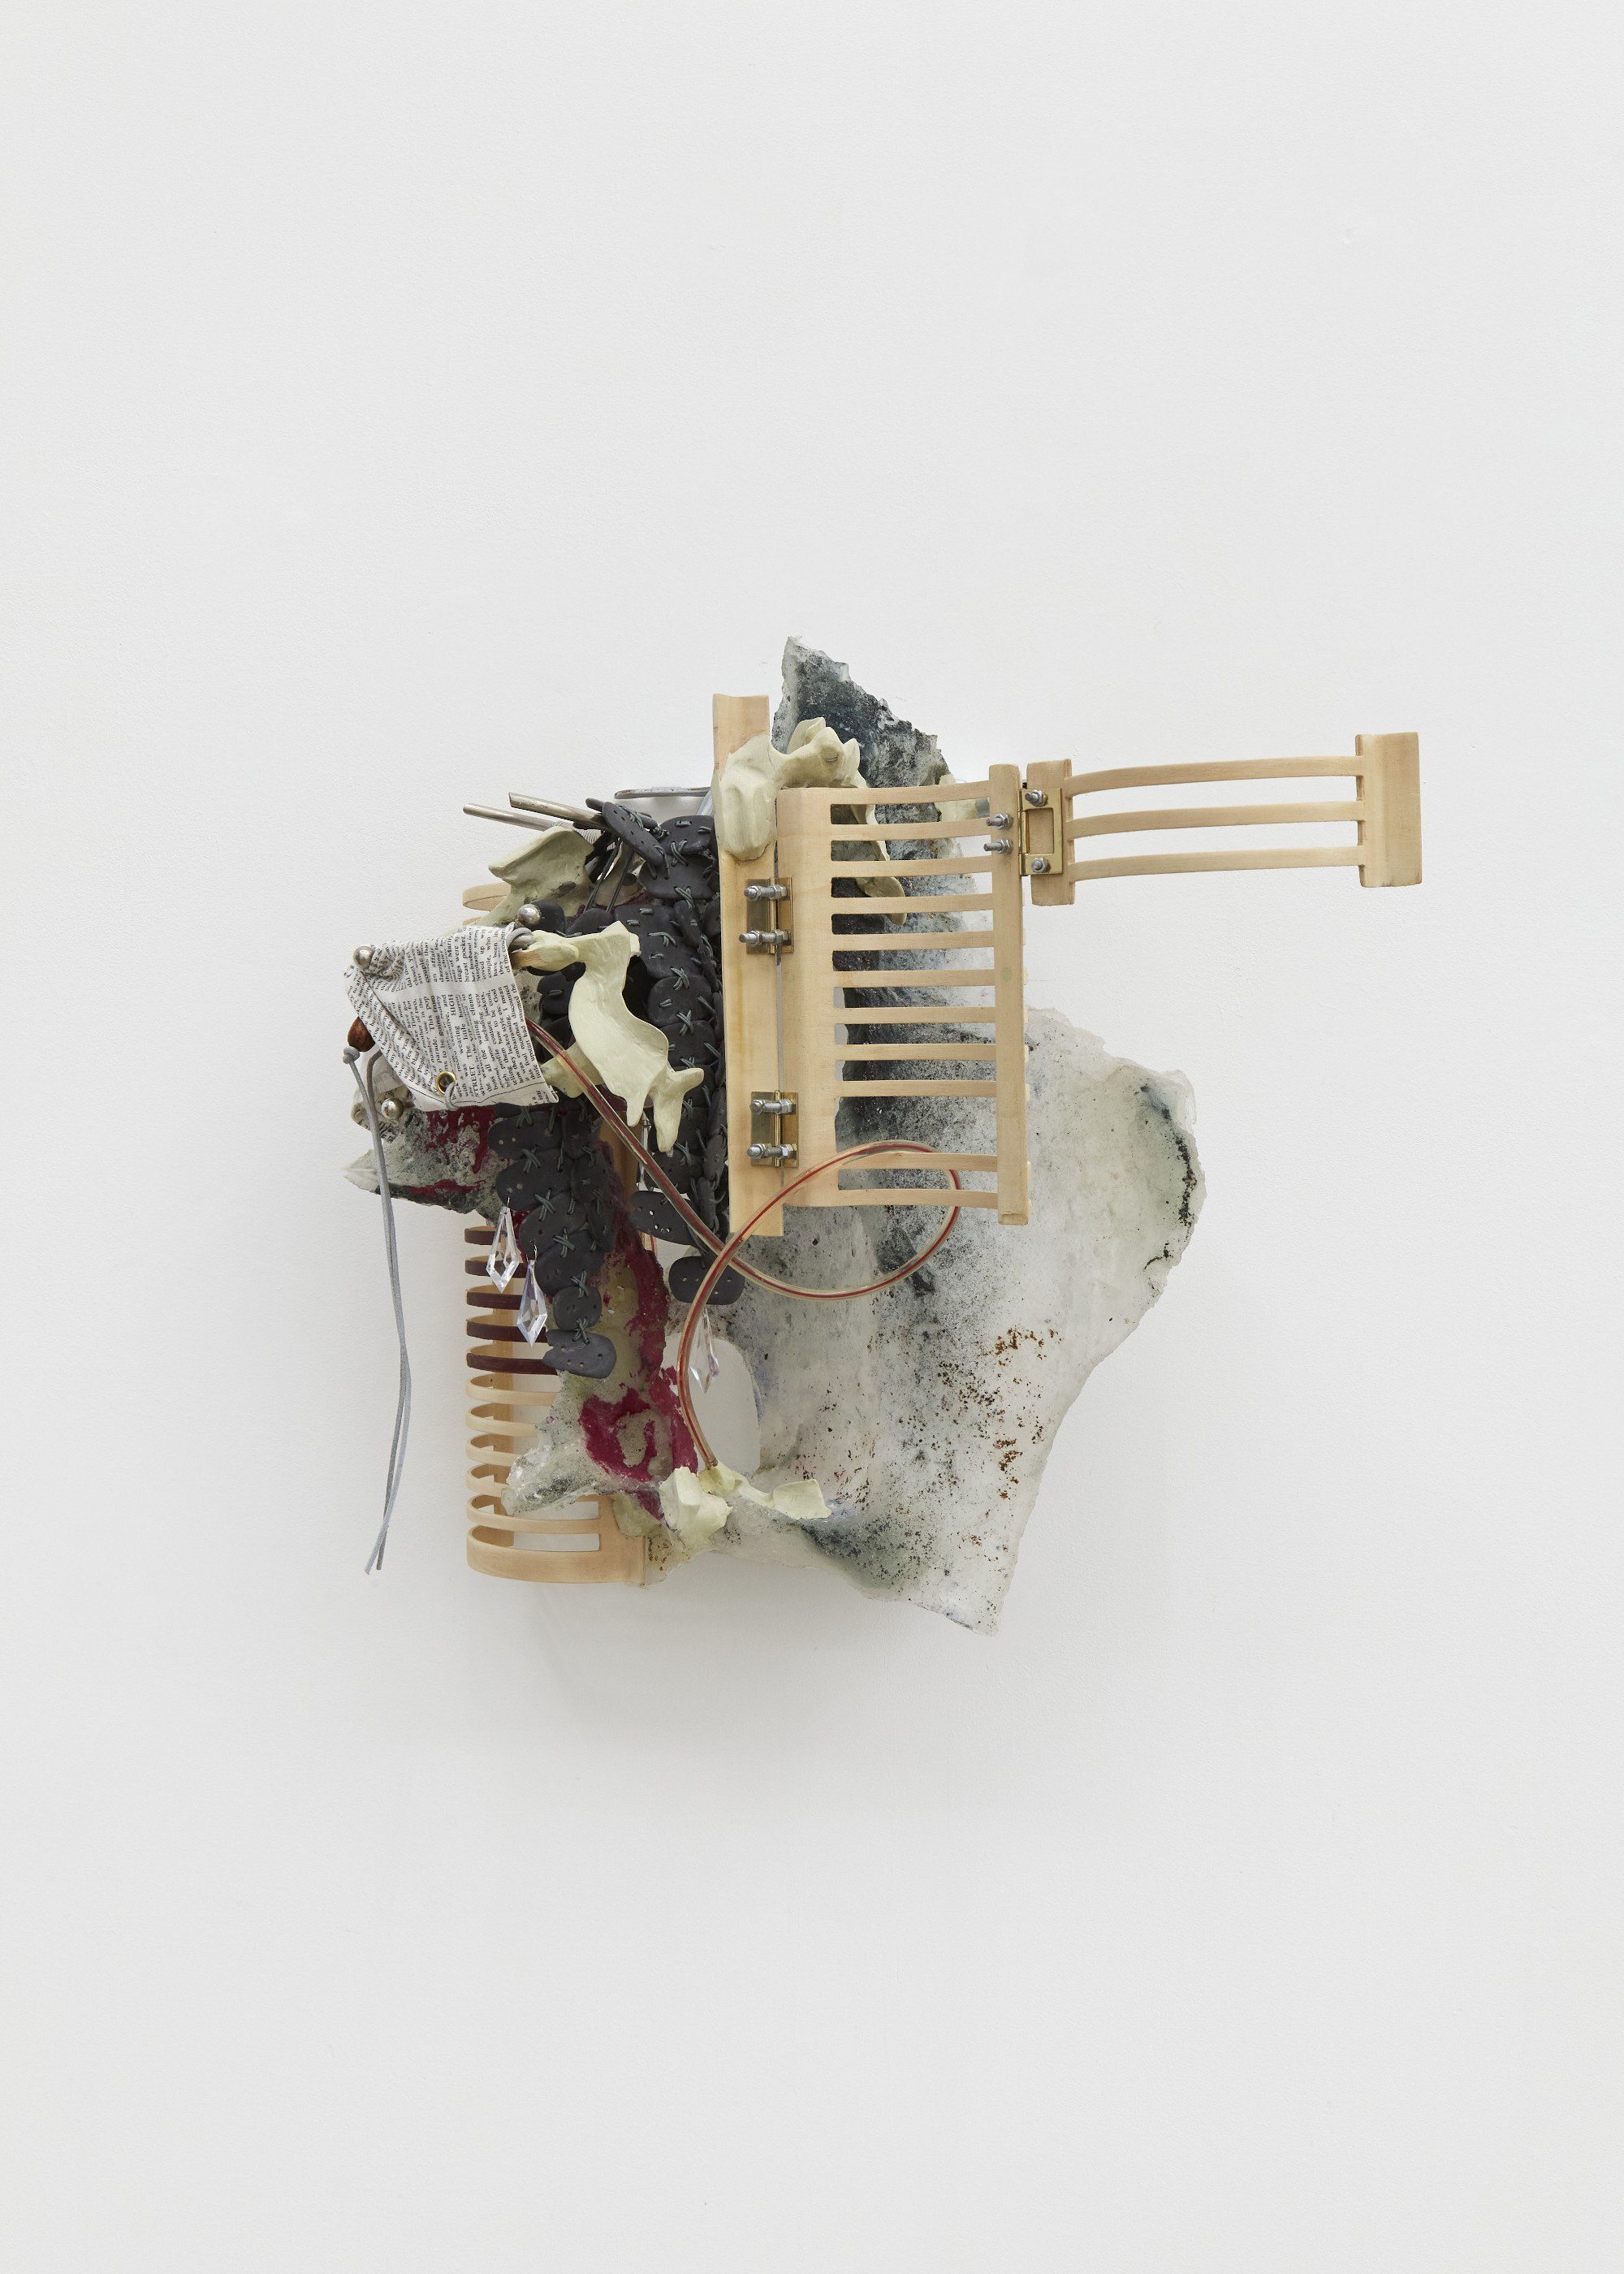 Revolving at Both Ends, 2022 - 2023. Epoxy resin, epoxy clay, jesmonite, metal, wood, cord, fabric, found object, acrylic and pigment, 58 (H), 50 (W), 51 (D) cm. 